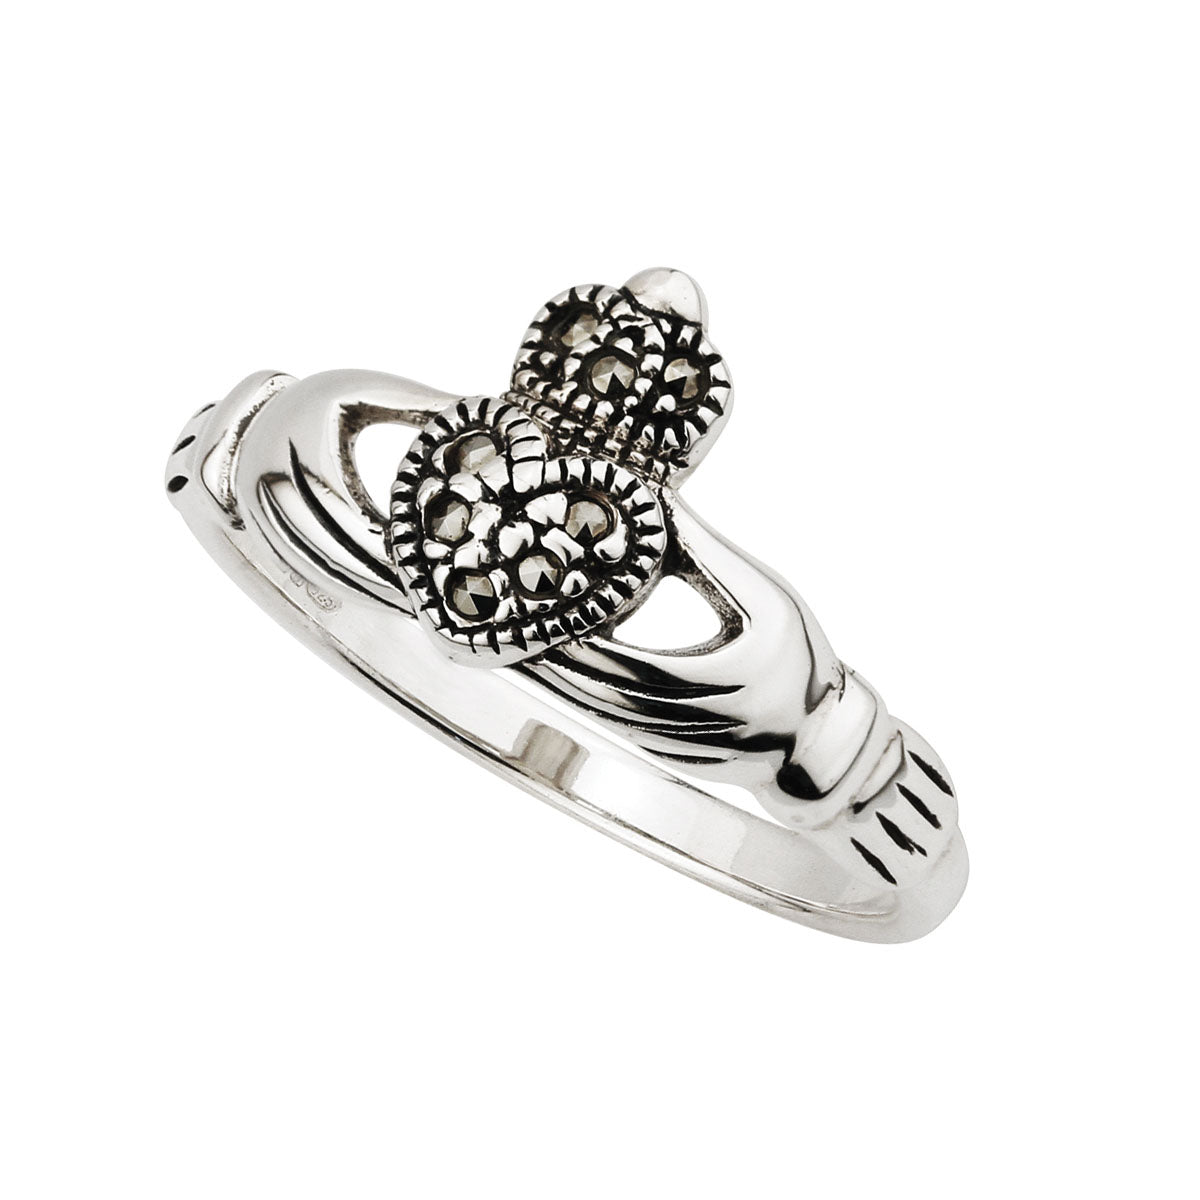 sterling silver marcasite claddagh ring s2448 from Solvar